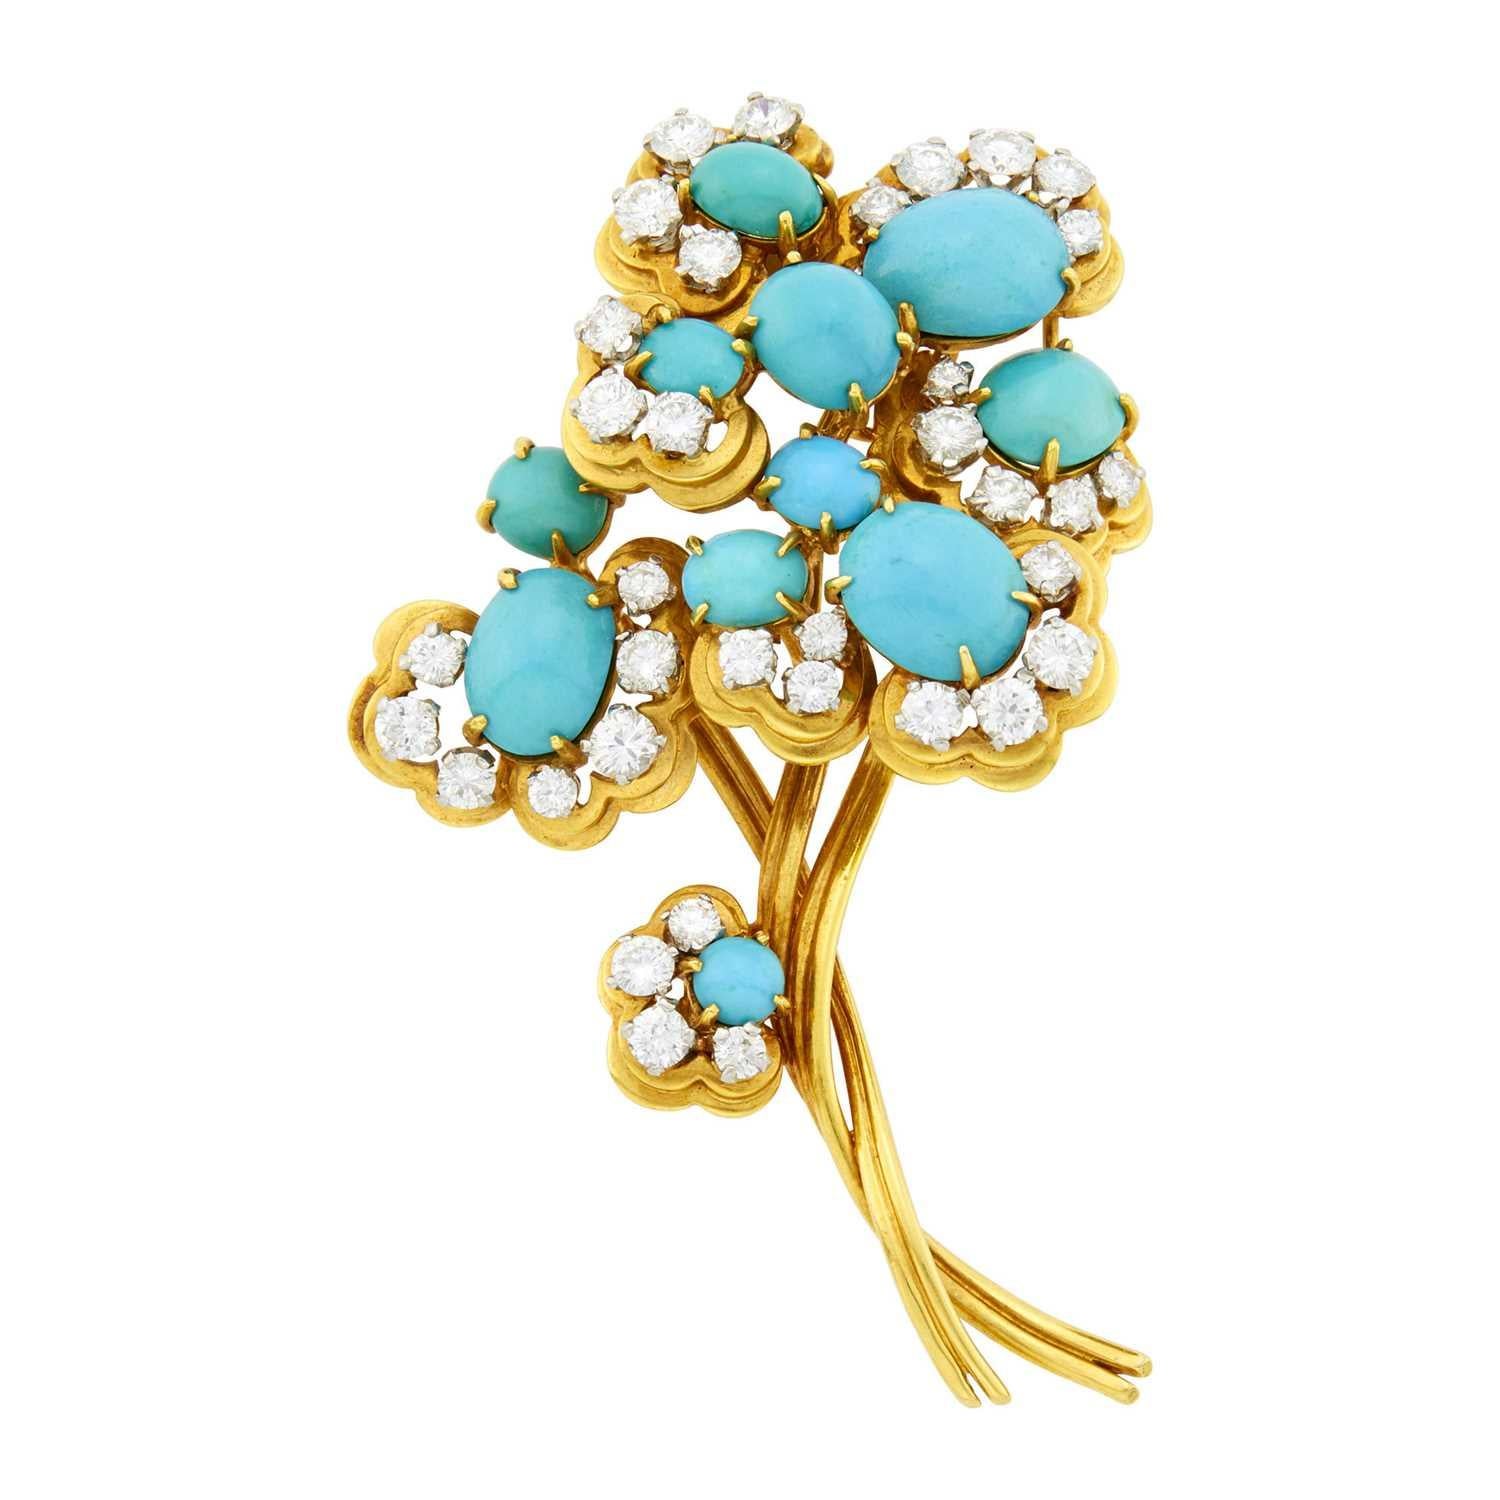 Van Cleef & Arpels Turquoise & Diamond Flower Bouquet Brooch.  

A bouquet brooch set with 11 turquoise and 35 round diamonds approximately 3.25 cts. 

Signed: Van Cleef & Arpels and numbered
Stamped: Made in France, with maker's mark

Measures